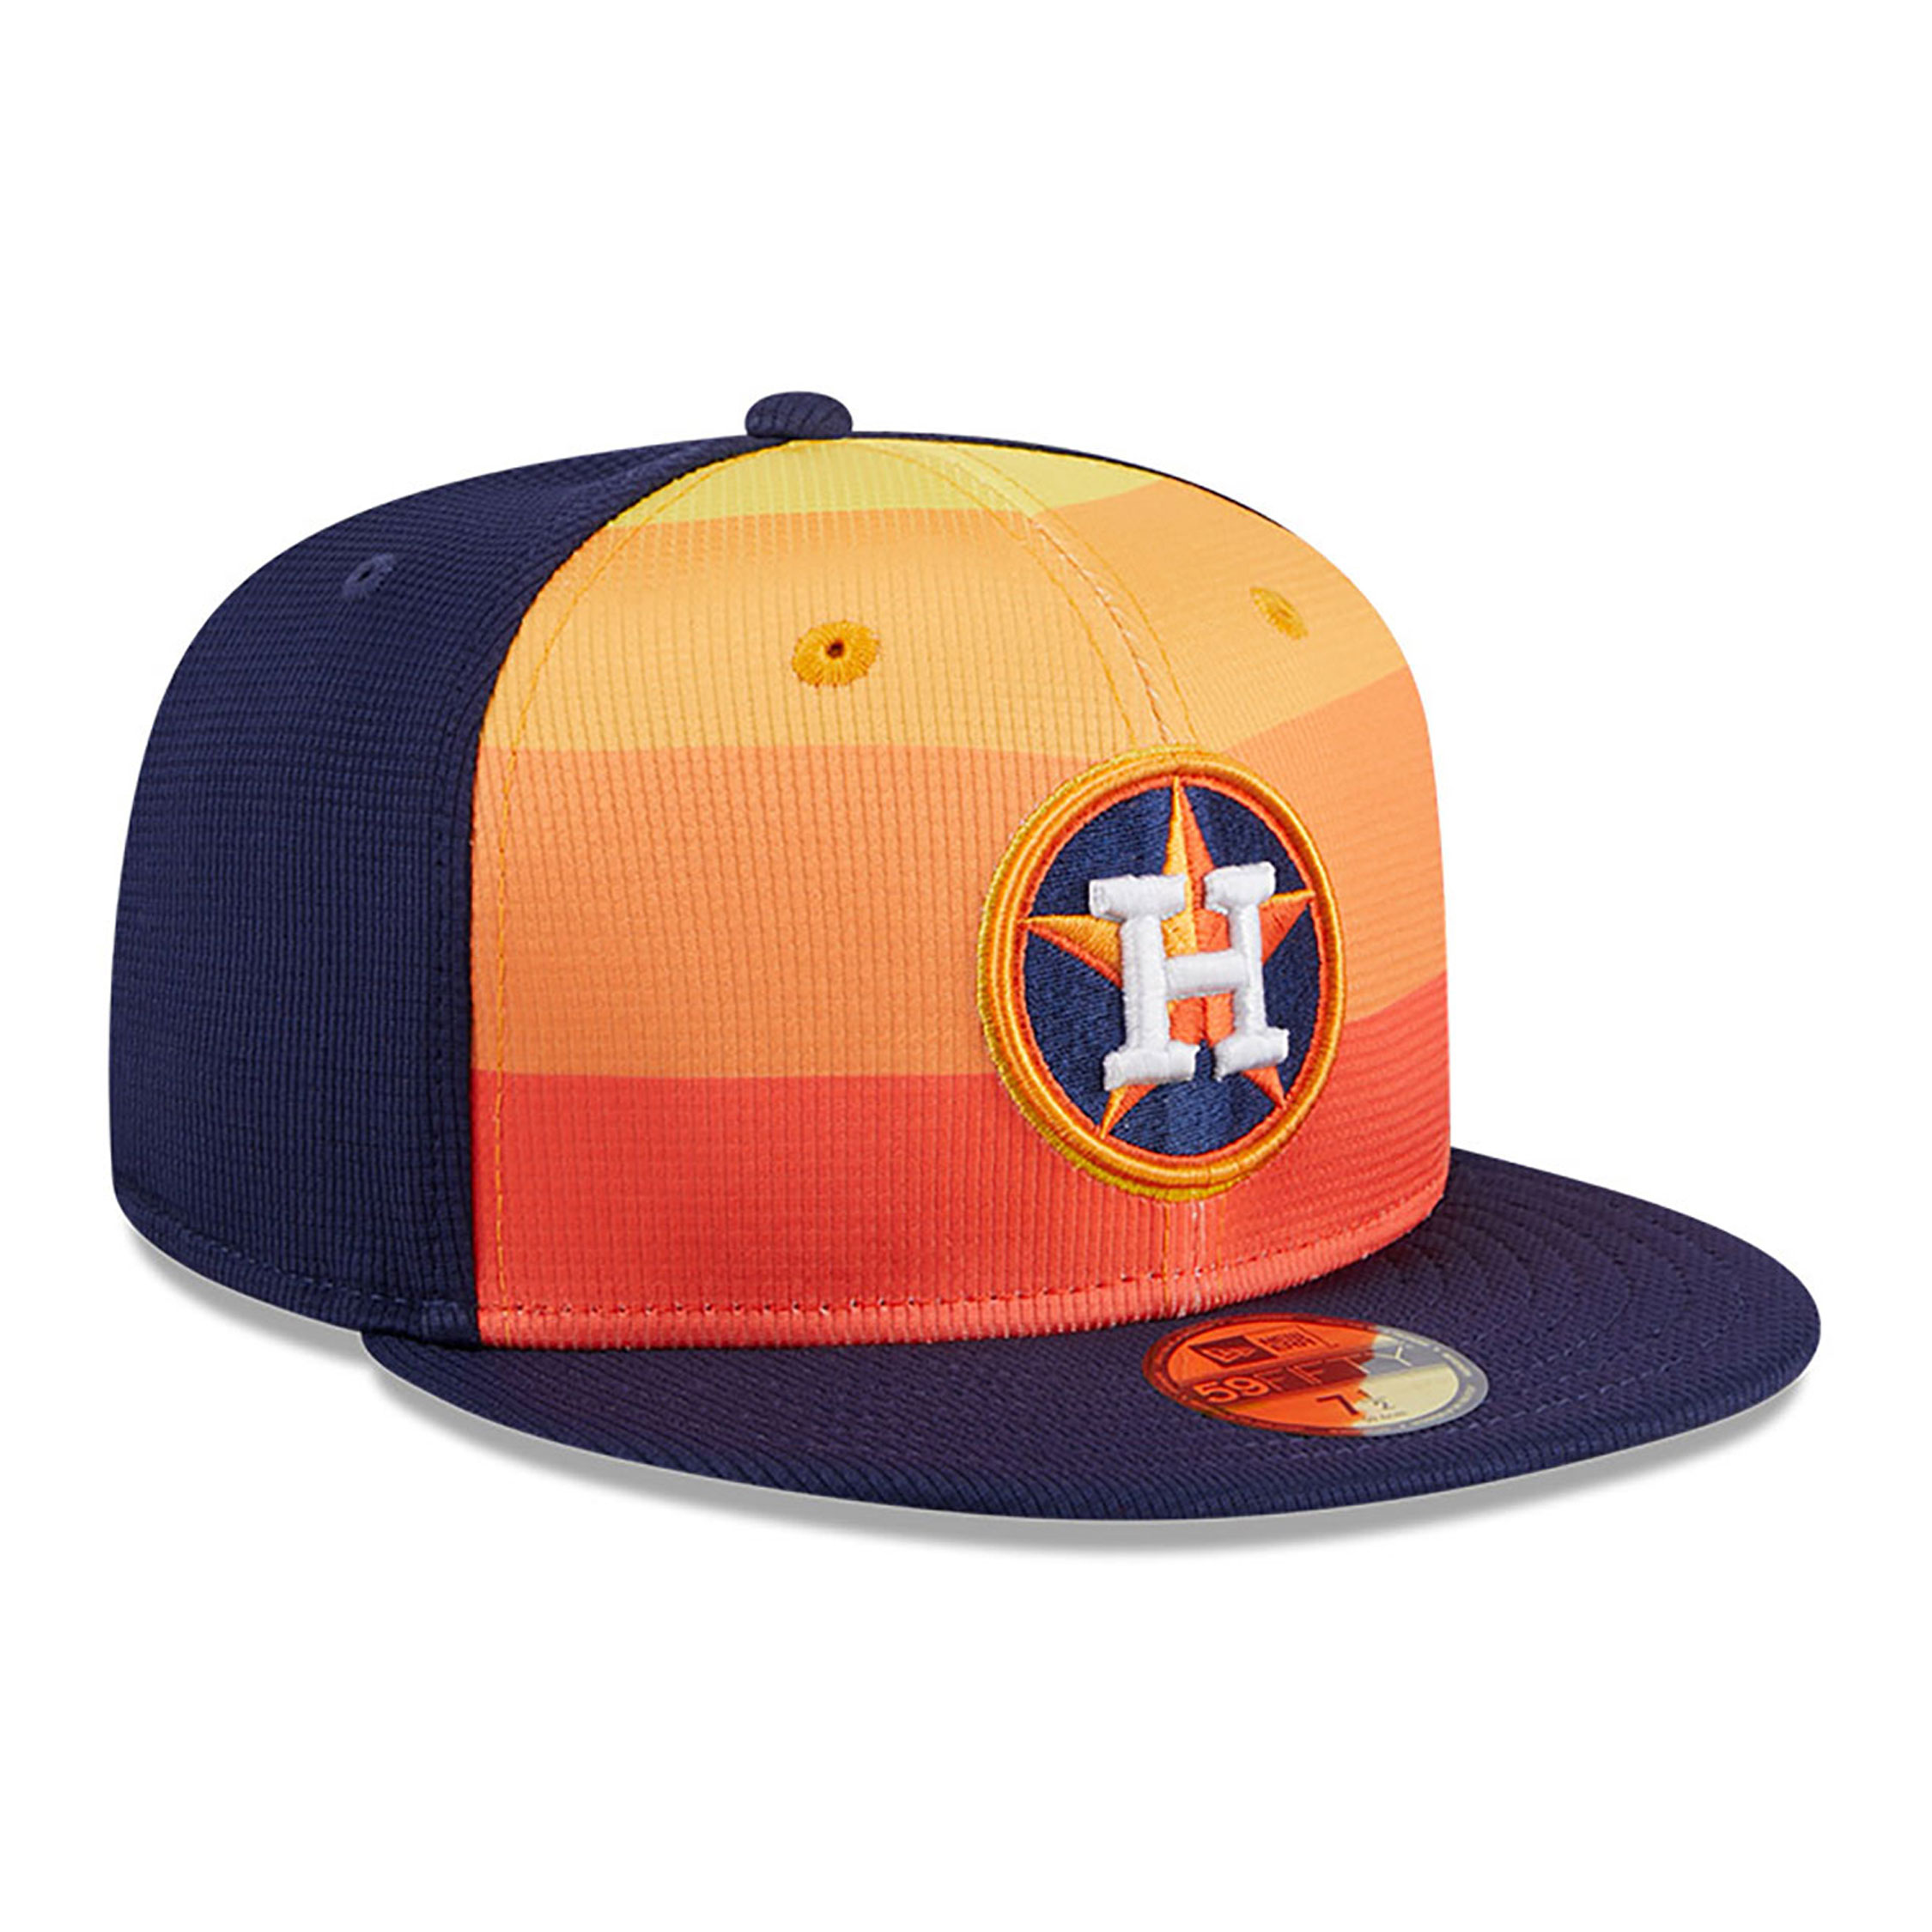 Houston Astros MLB Batting Practice Navy 59FIFTY Fitted Cap